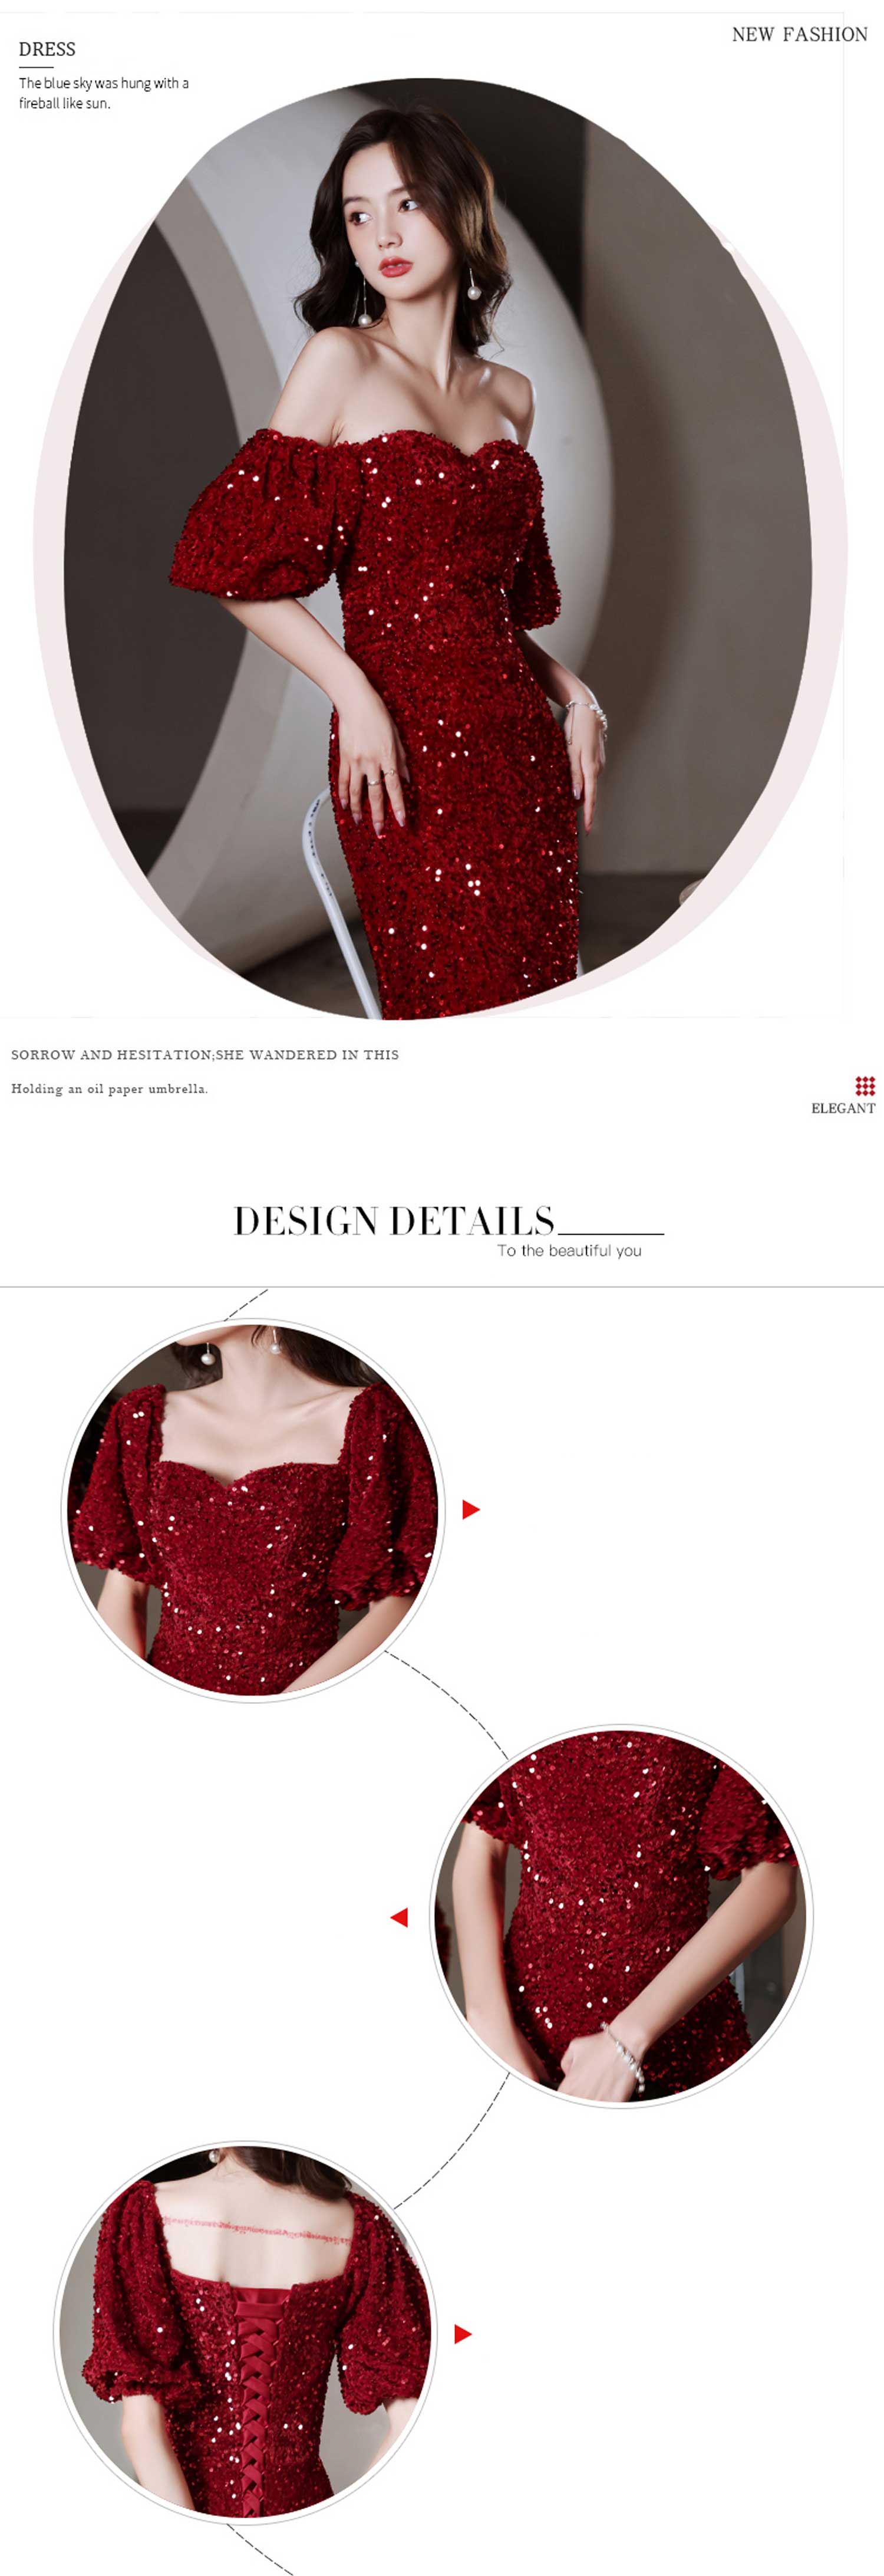 Fashion-Wine-Red-Sparkly-Evening-Party-Dress-Elegant-Ball-Gown08